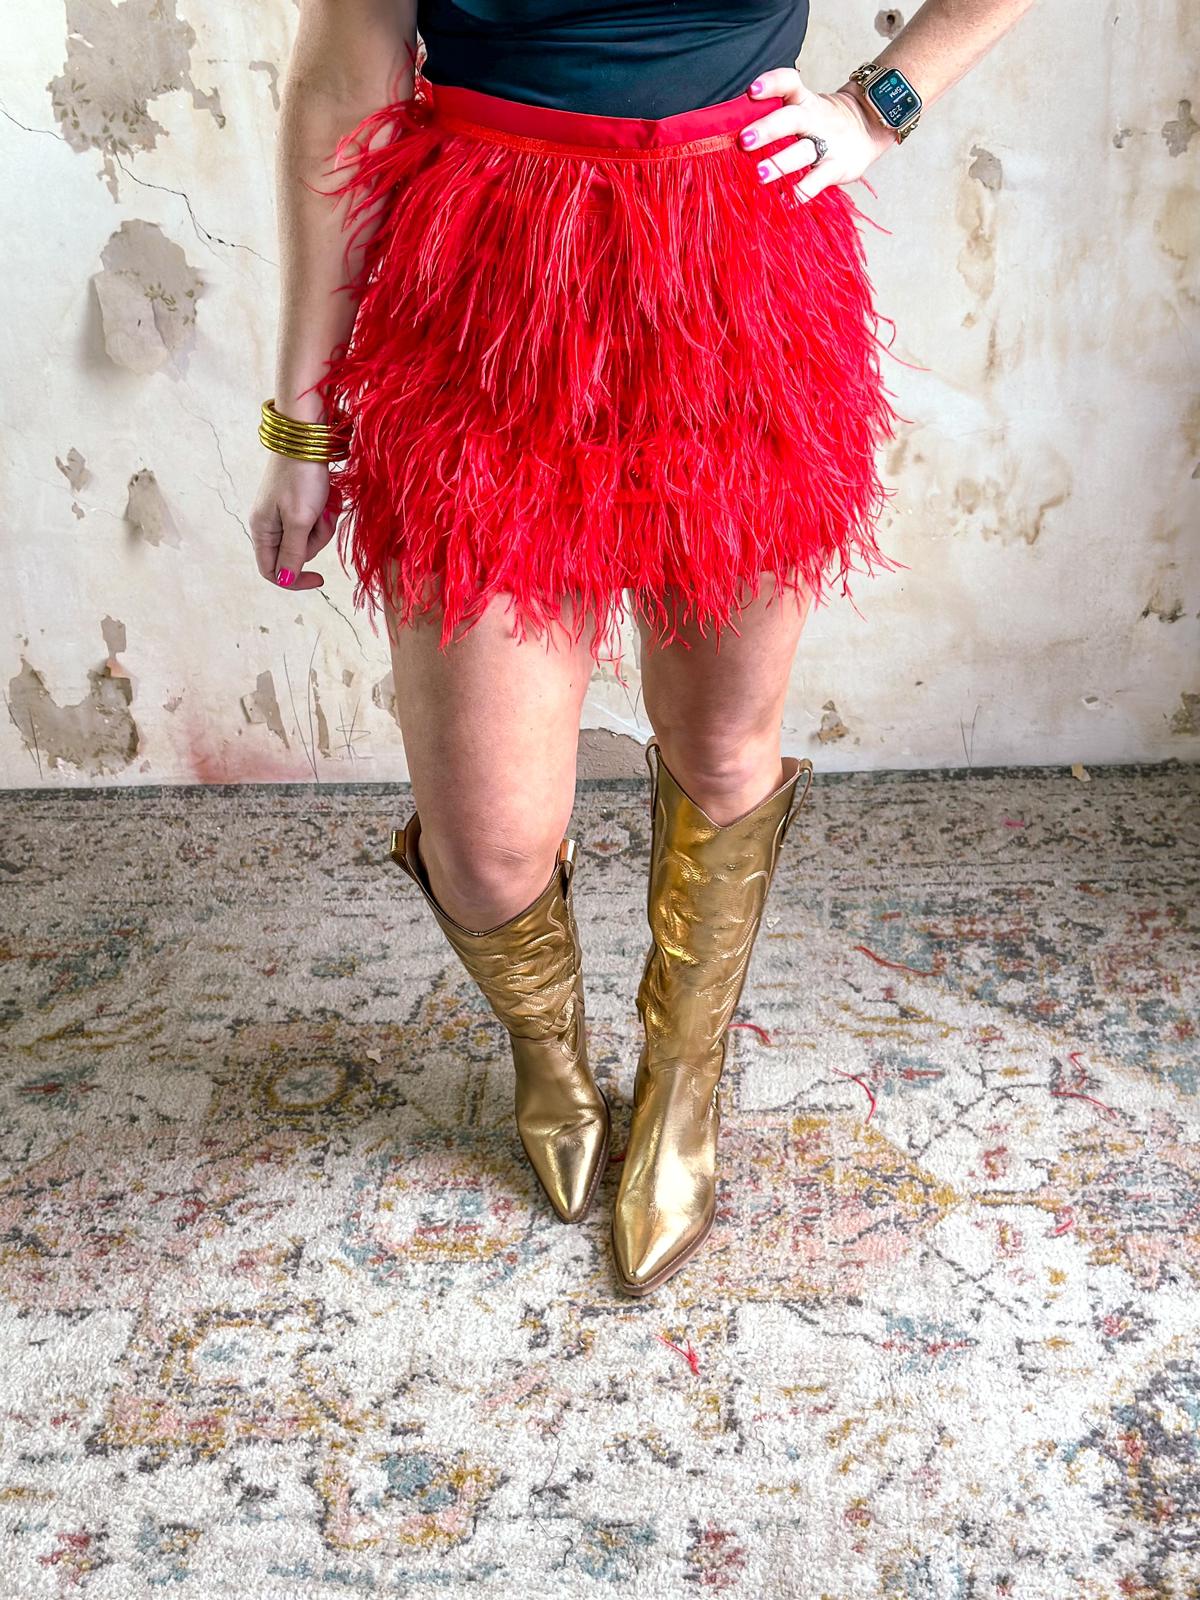 Queen of Sparkles: Bright Red Feather Skirt Medium